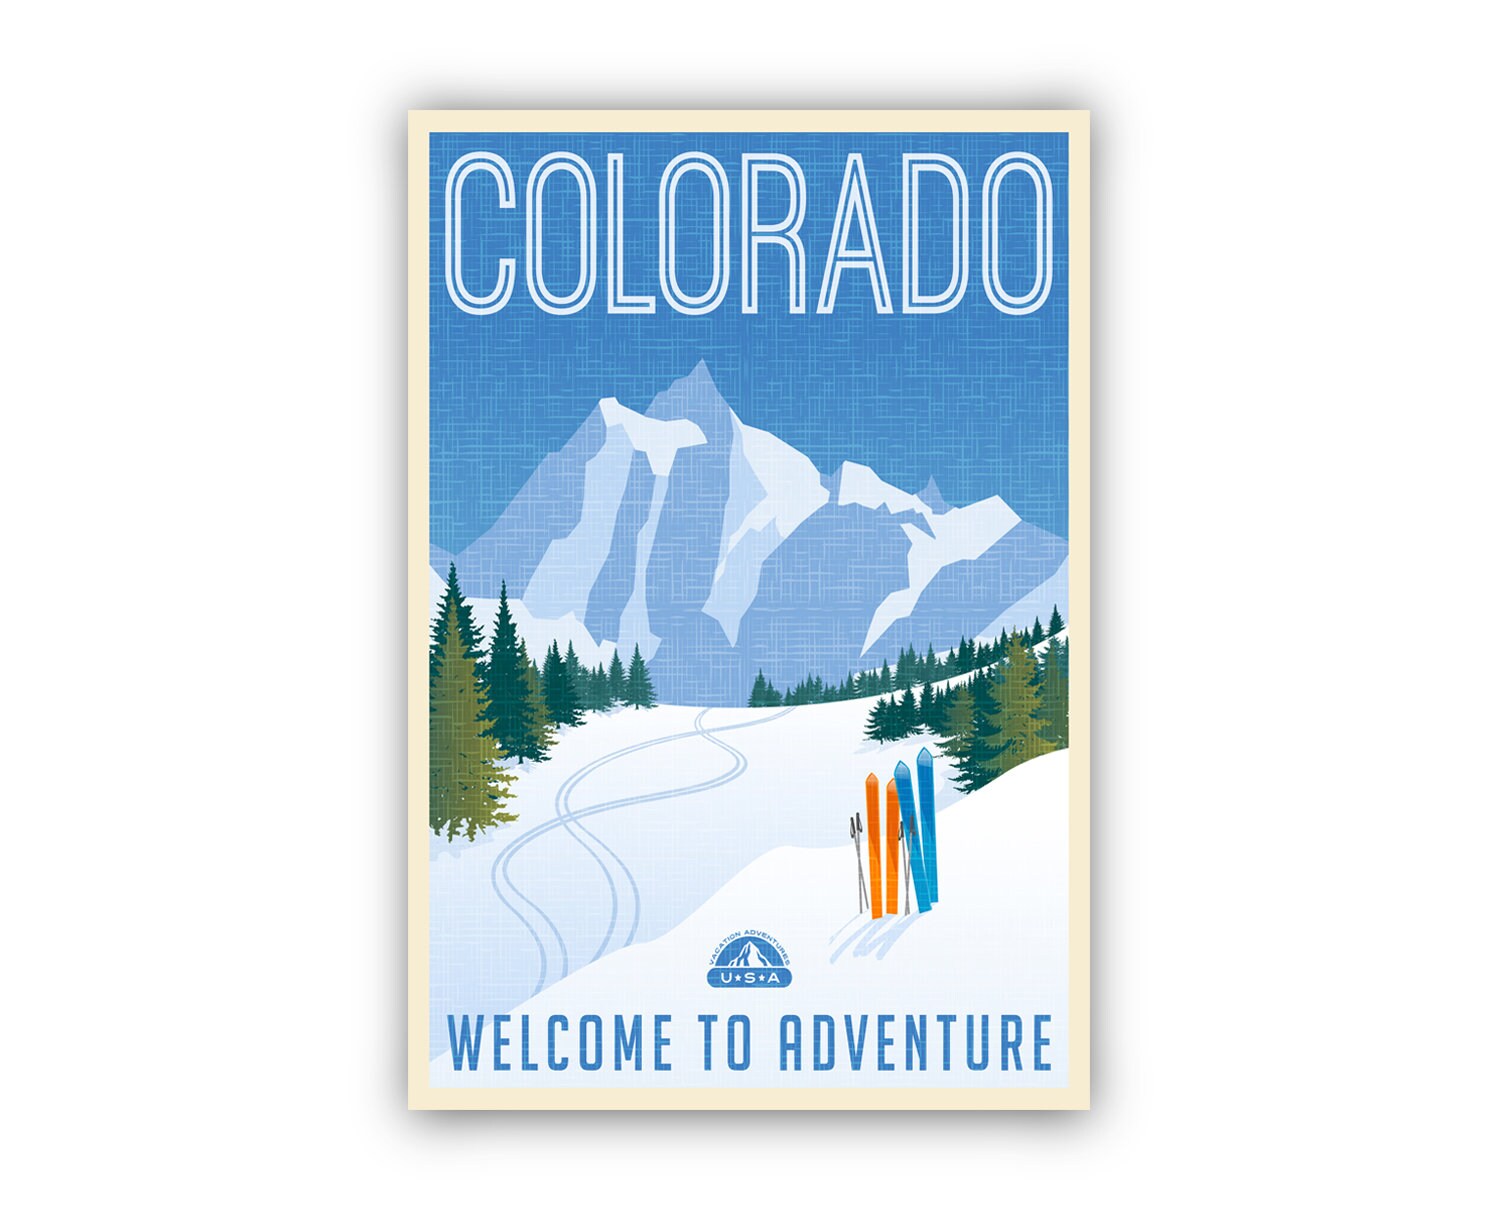 Retro Style Travel Poster, Colorado Vintage Rustic Poster Print, Home Wall Art, Office Wall Decoration, Colorado poster, State Map Poster